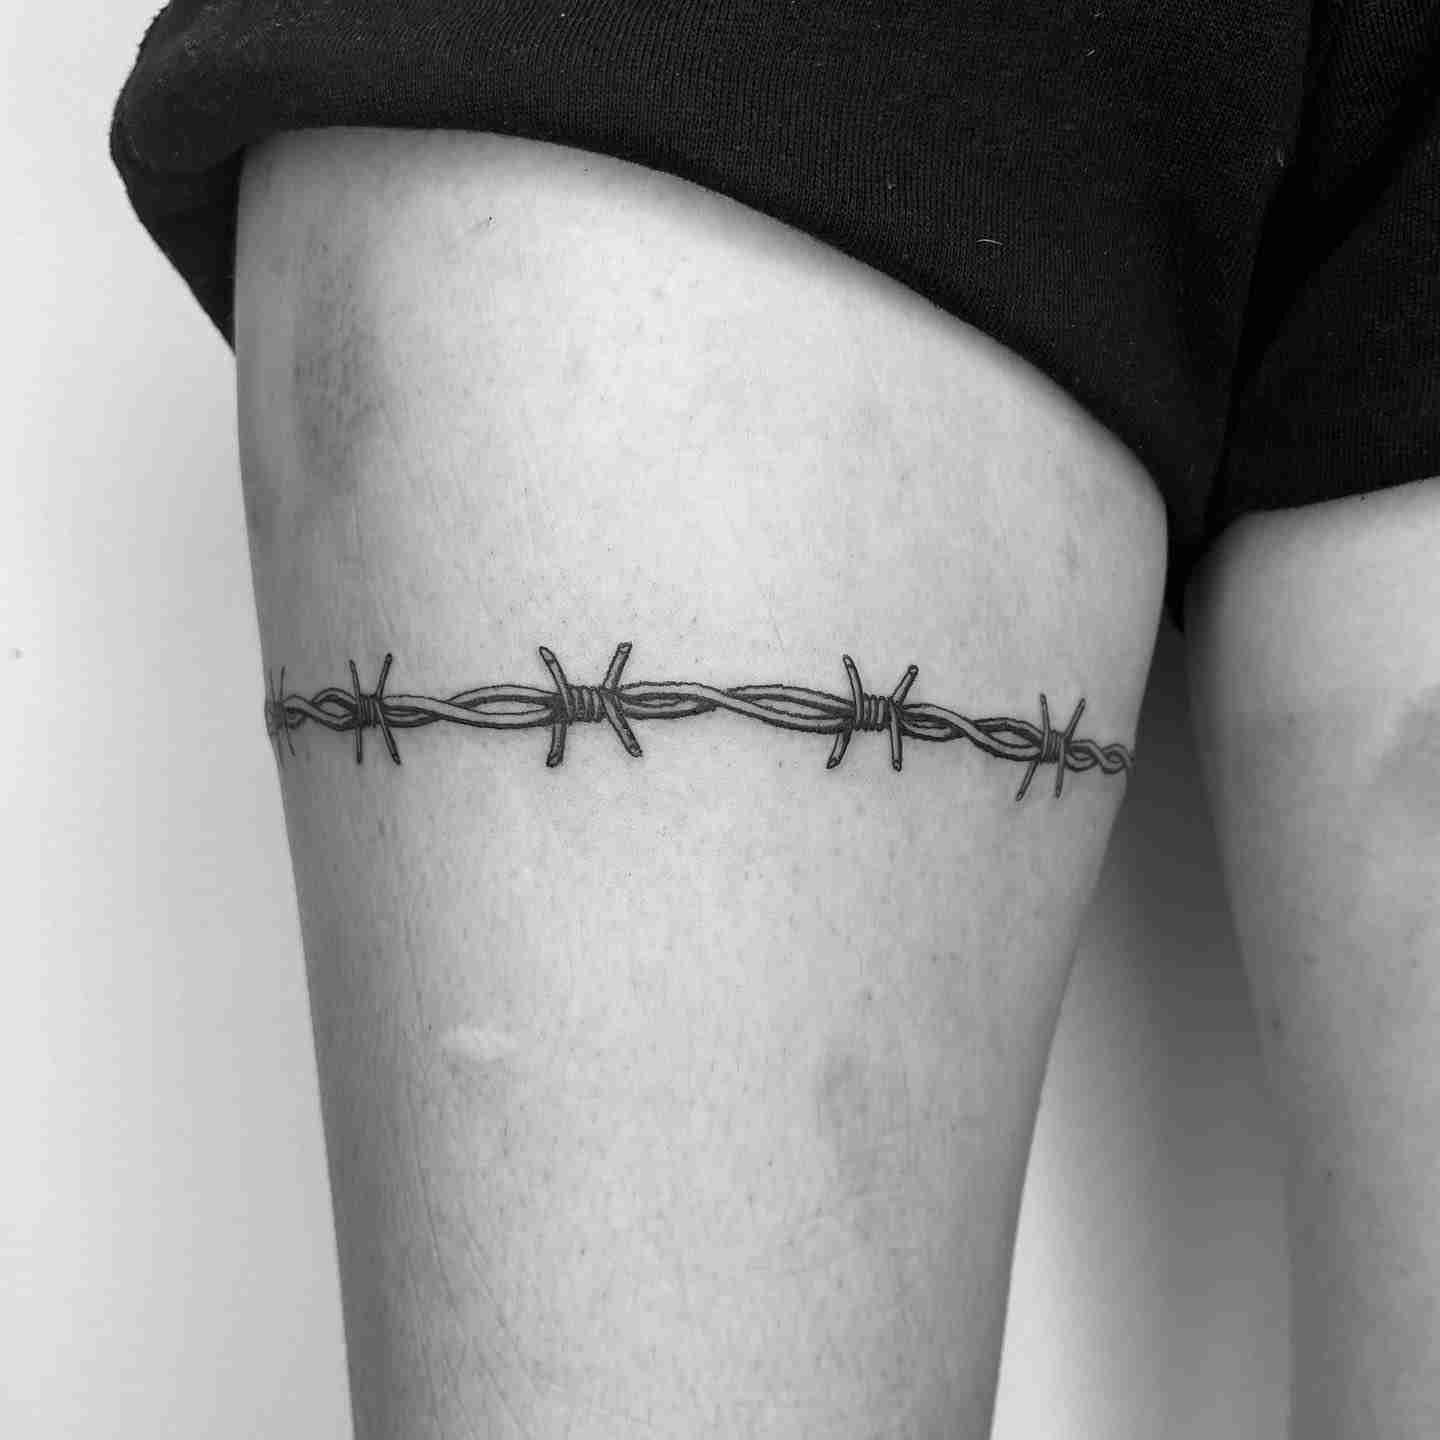 Barbed wire arm band tattoo